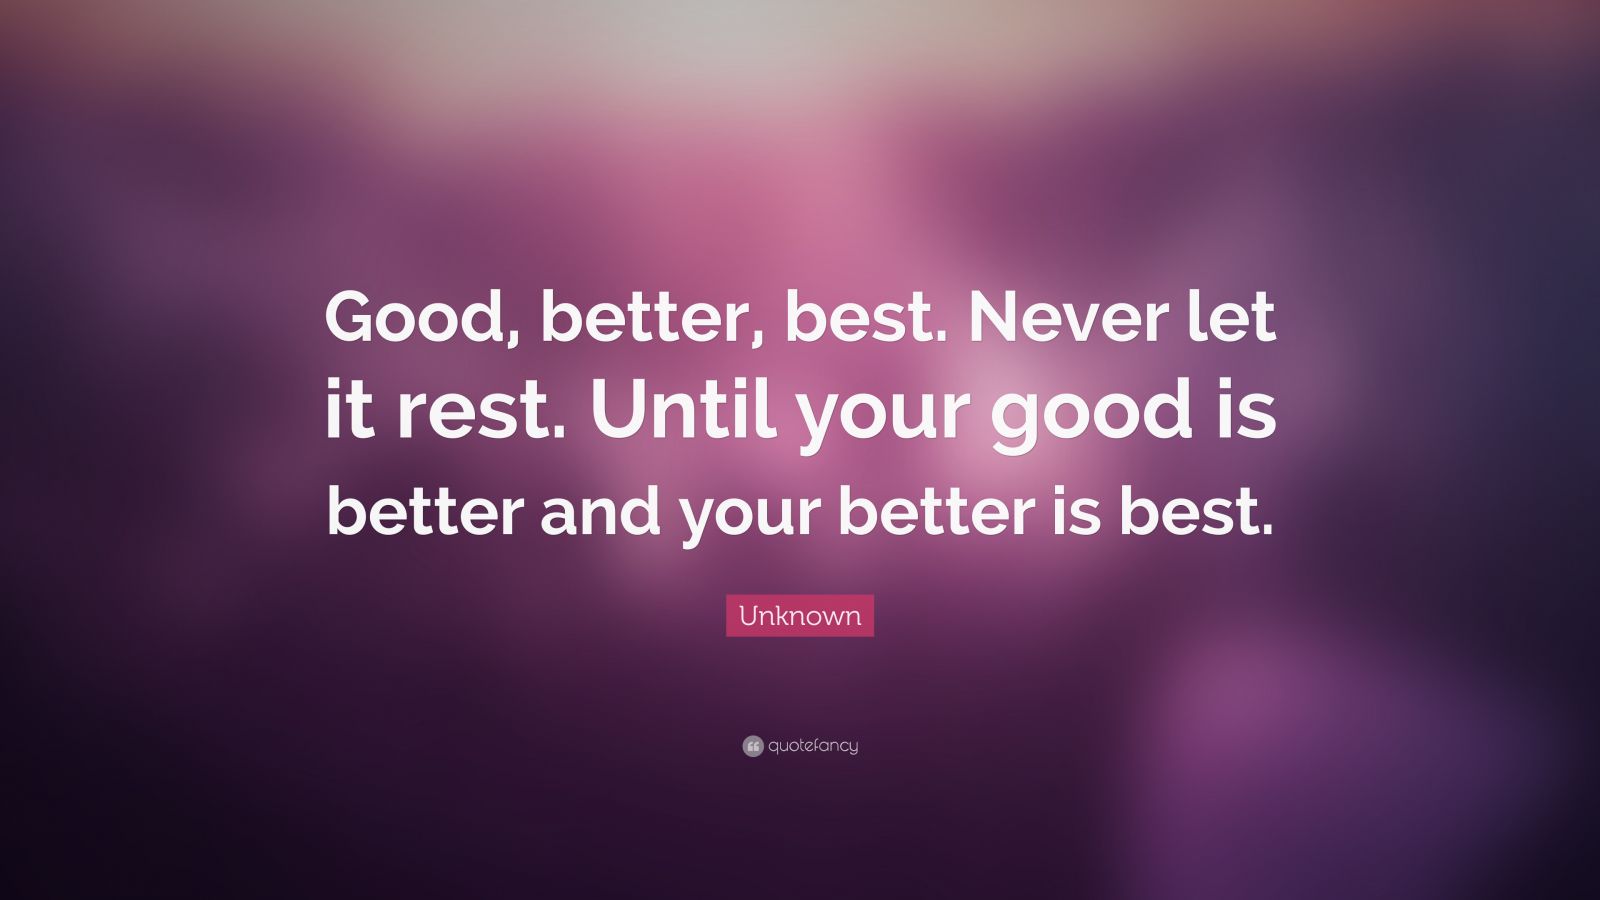 Tim Duncan Quote: "Good, better, best. Never let it rest. Until your good is better and your ...